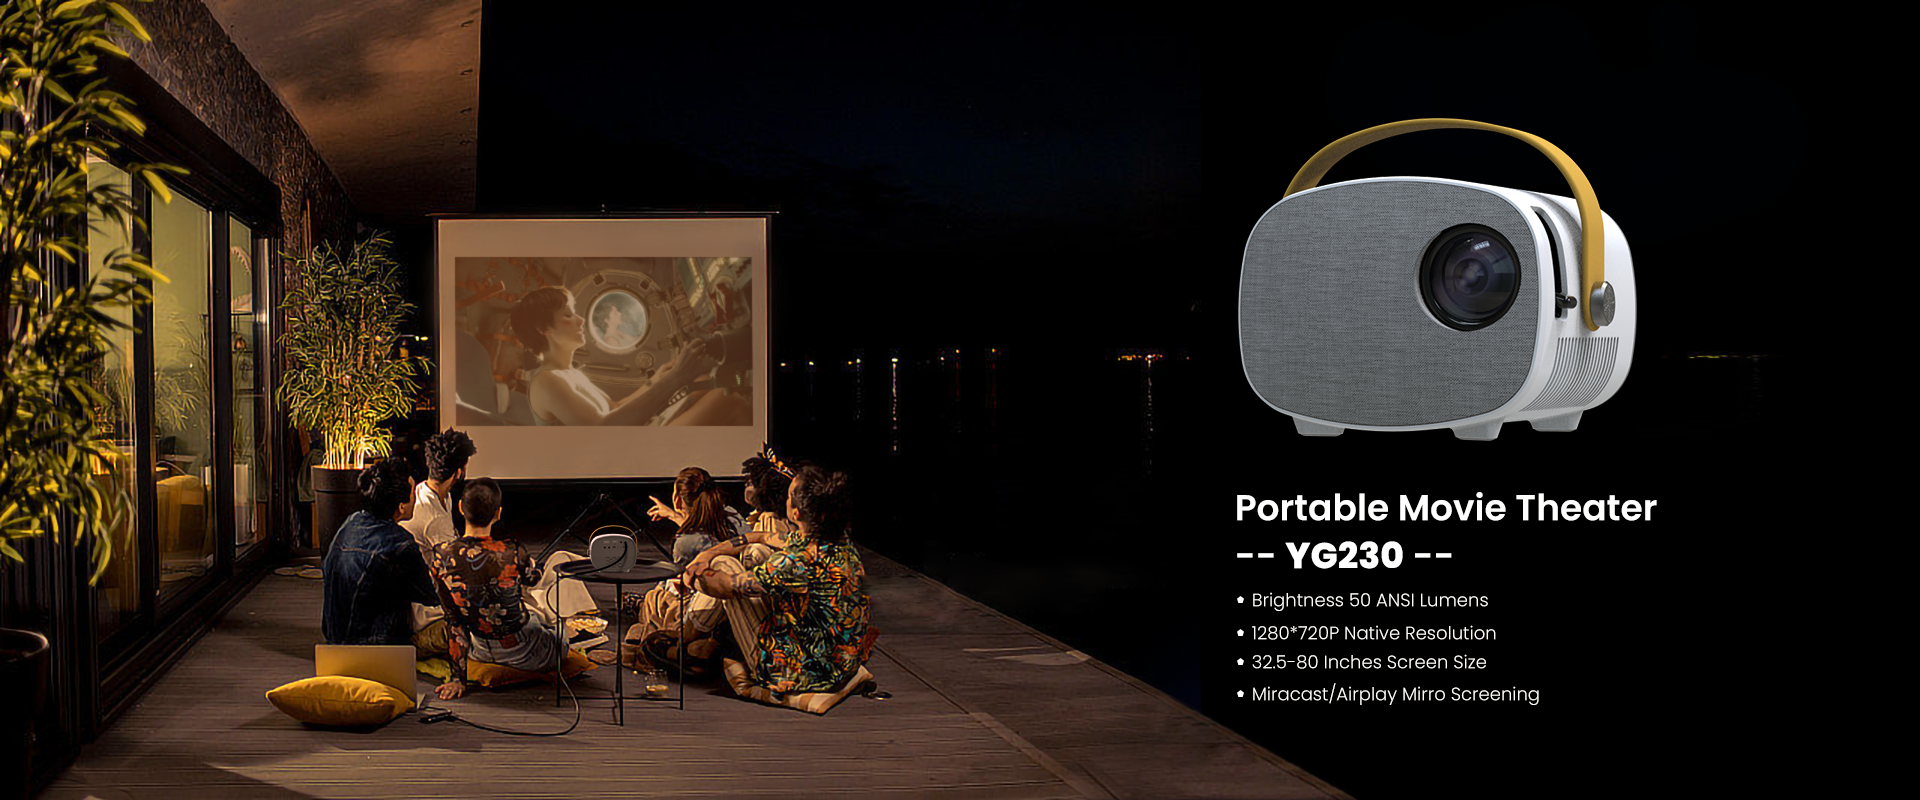 Mobile Video Projector